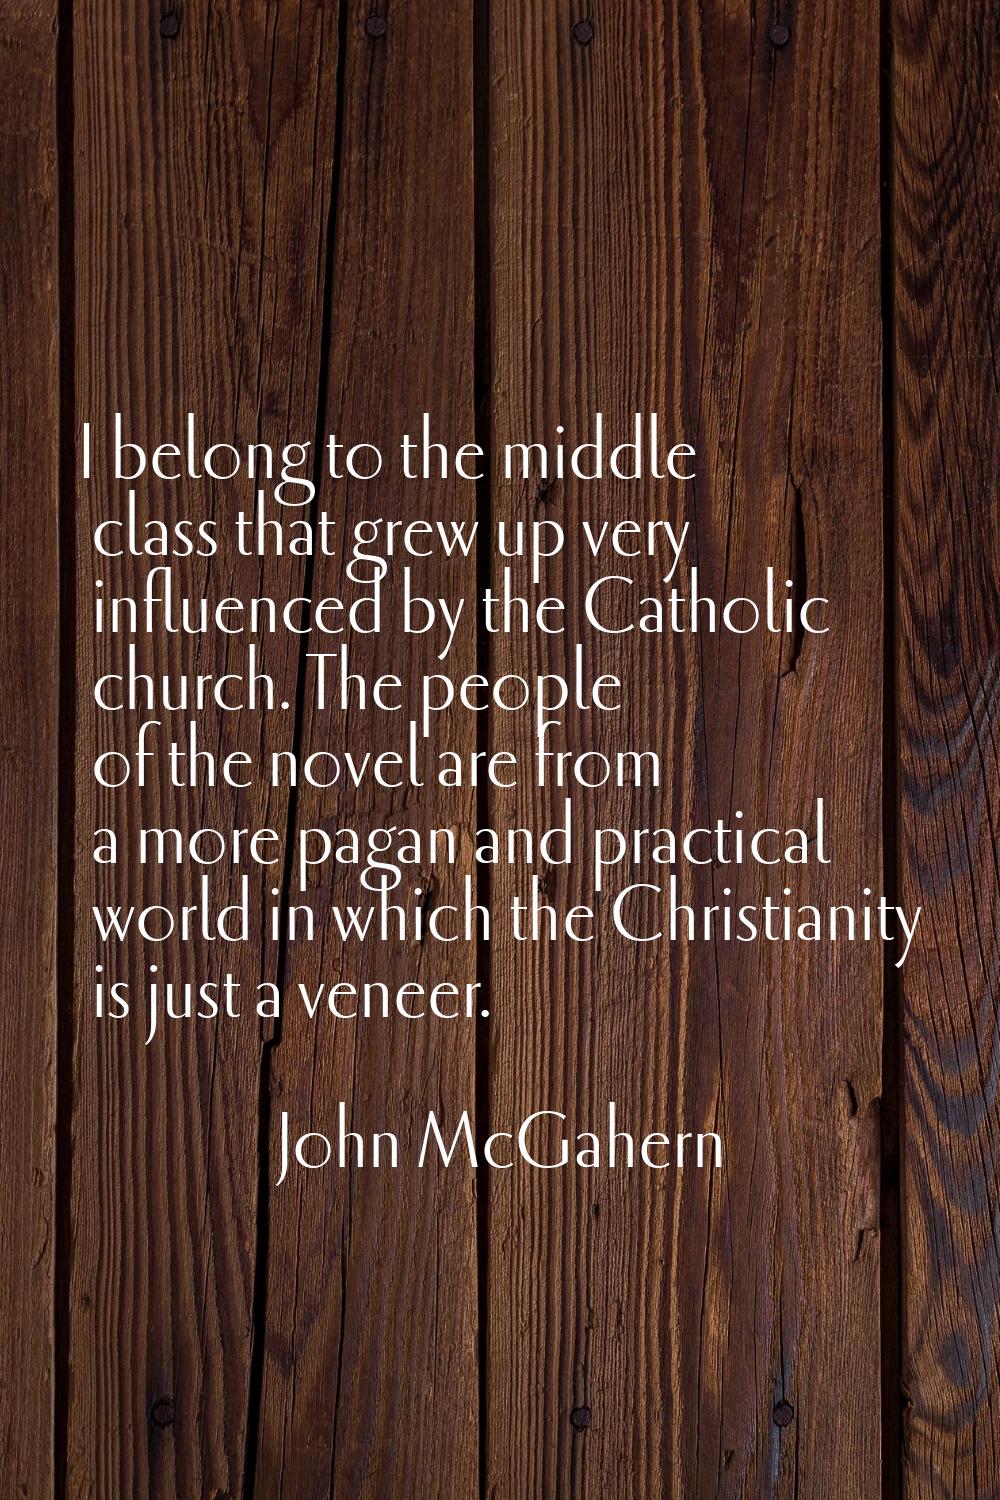 I belong to the middle class that grew up very influenced by the Catholic church. The people of the